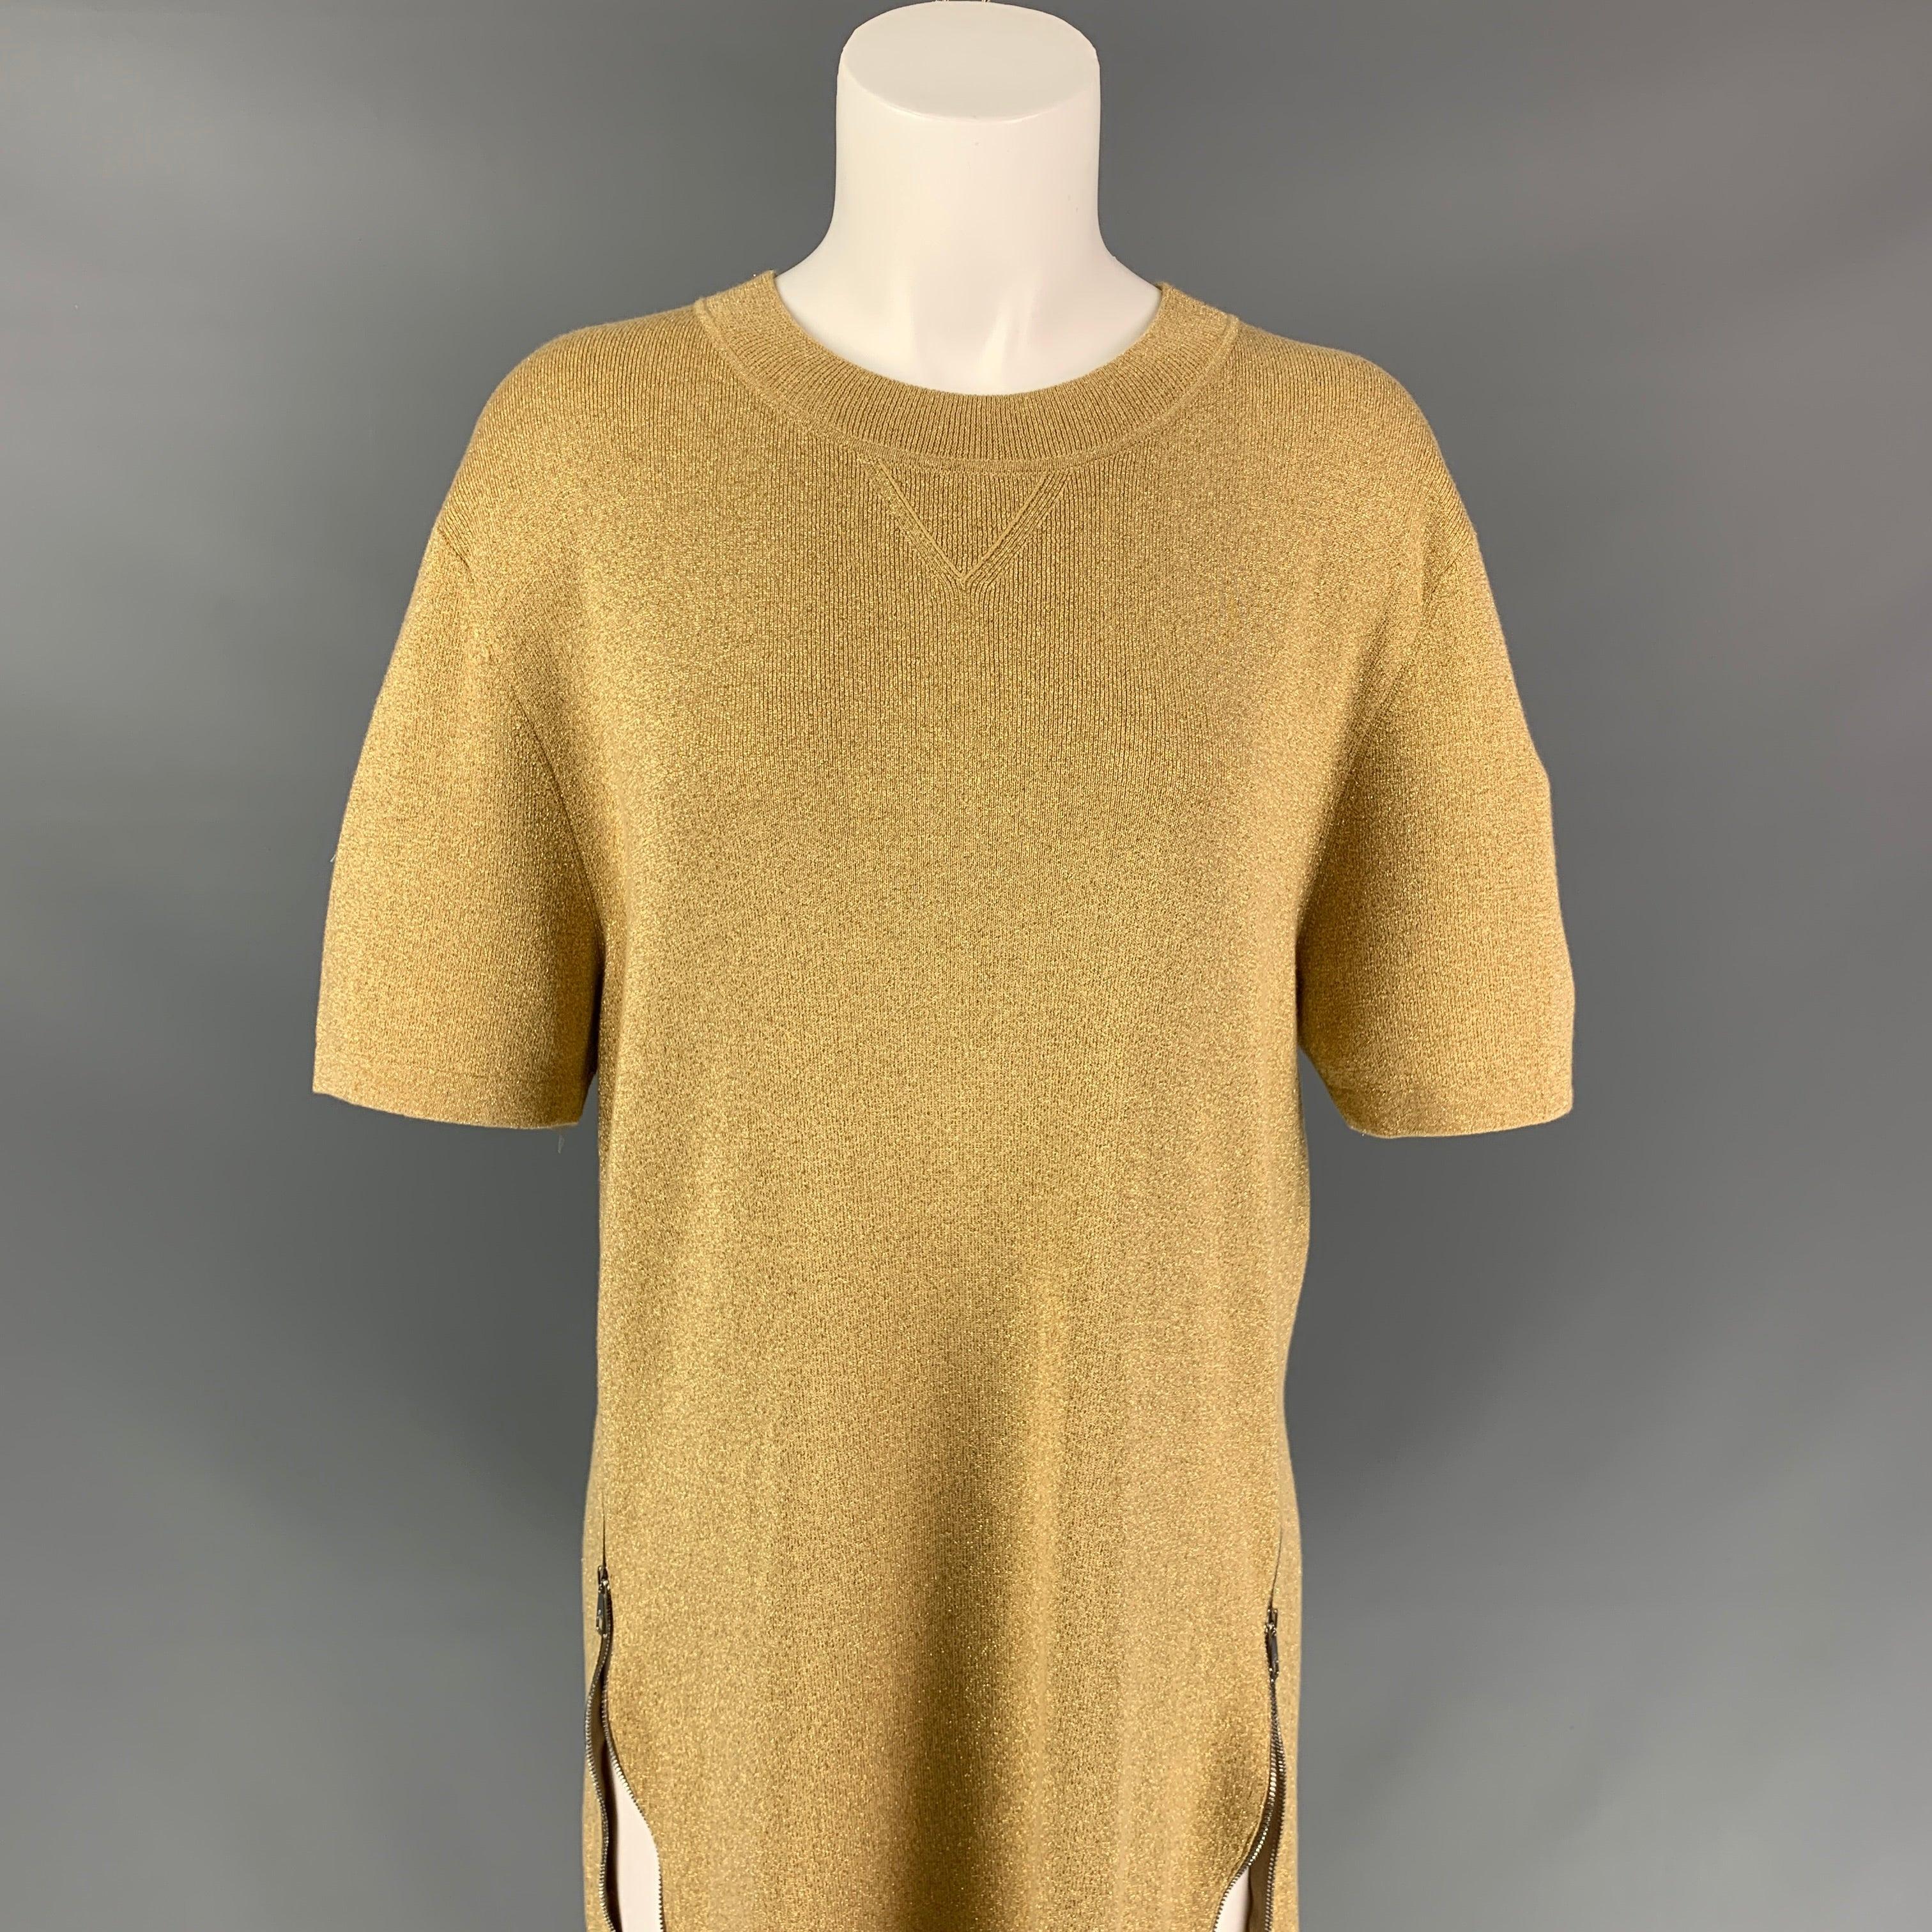 NEIL BARRETT pullover comes in a gold metallic polyester blend featuring a straight fit, side zippers, short sleeves, and a crew-neck.
Very Good
Pre-Owned Condition. 

Marked:   M 

Measurements: 
 
Shoulder: 19.5 inches  Bust: 38 inches  Sleeve: 10